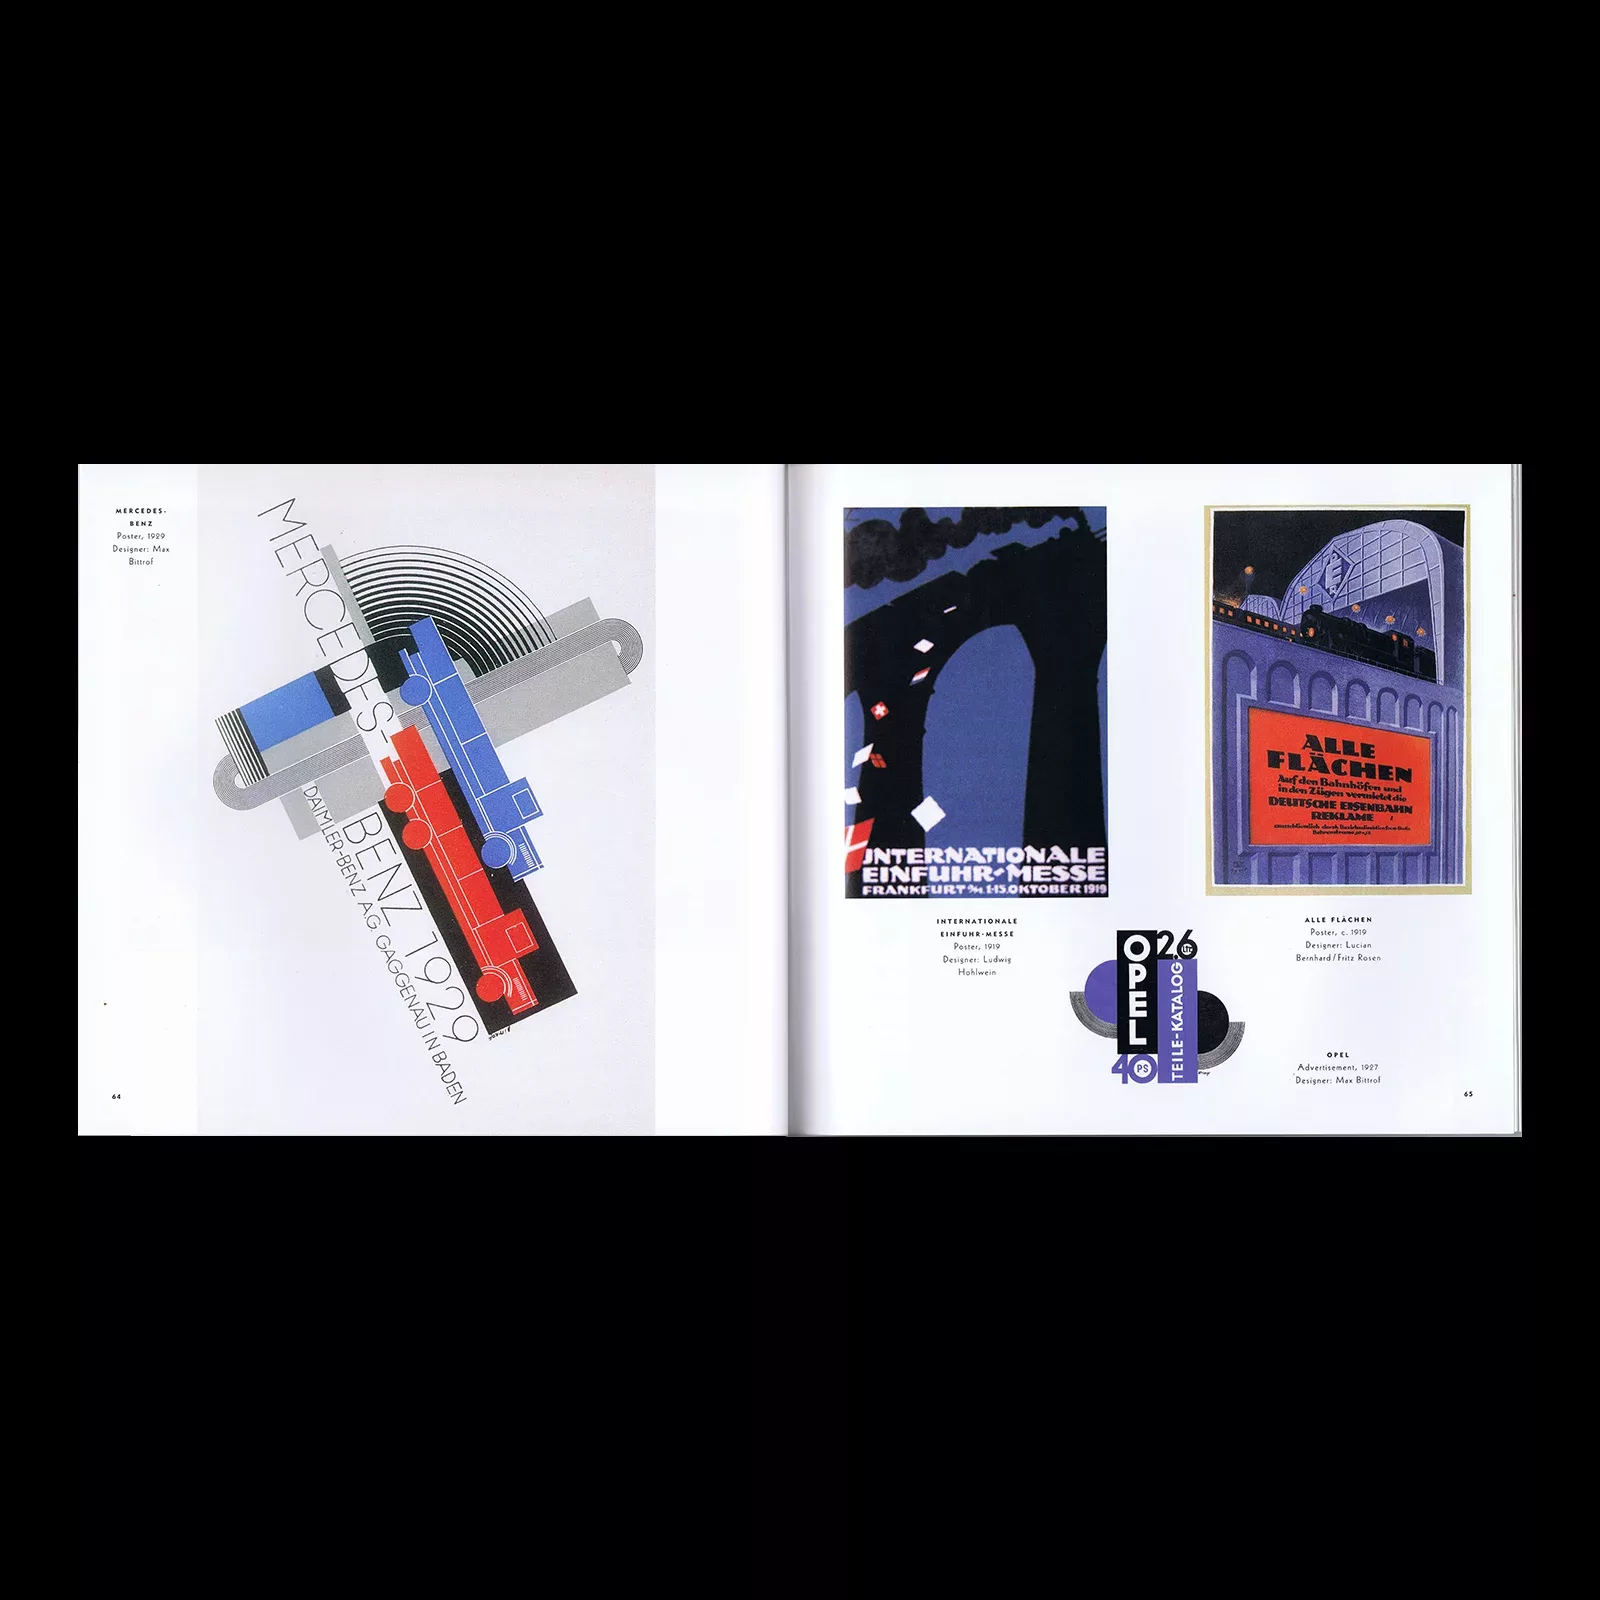 German Modern - Graphic Design from Wilhelm to Weimar, Chronicle Books, 1998